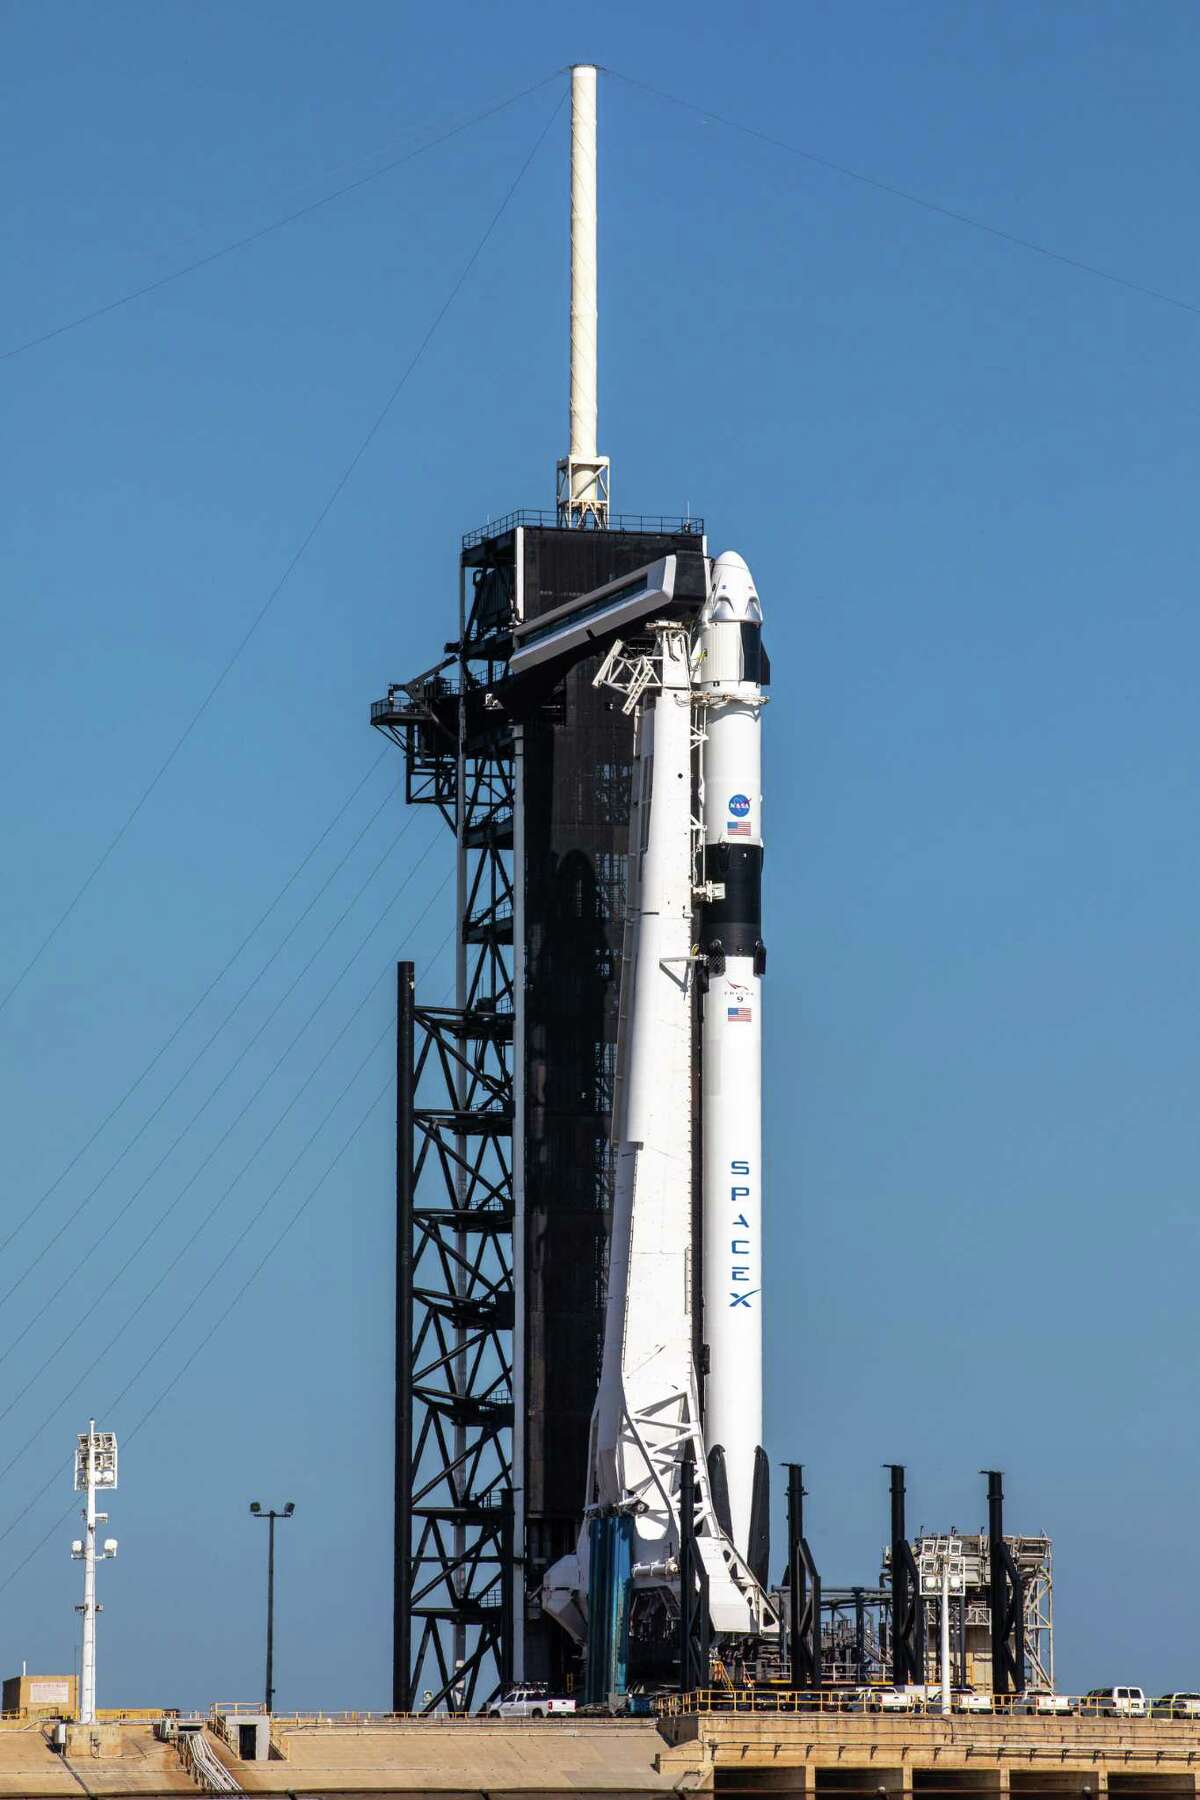 A SpaceX Falcon 9 rocket, with the Crew Dragon spacecraft atop, stands poised for launch at Launch Complex 39A at NASA’s Kennedy Space Center in Florida on May 21, 2020, ahead of NASA and SpaceX's Demo-2 mission. The rocket and spacecraft will carry NASA astronauts Bob Behnken and Doug Hurley to the International Space Station as part of the agency’s Commercial Crew Program. Launch is slated for 3:33 p.m. CDT on Wednesday, May 27.